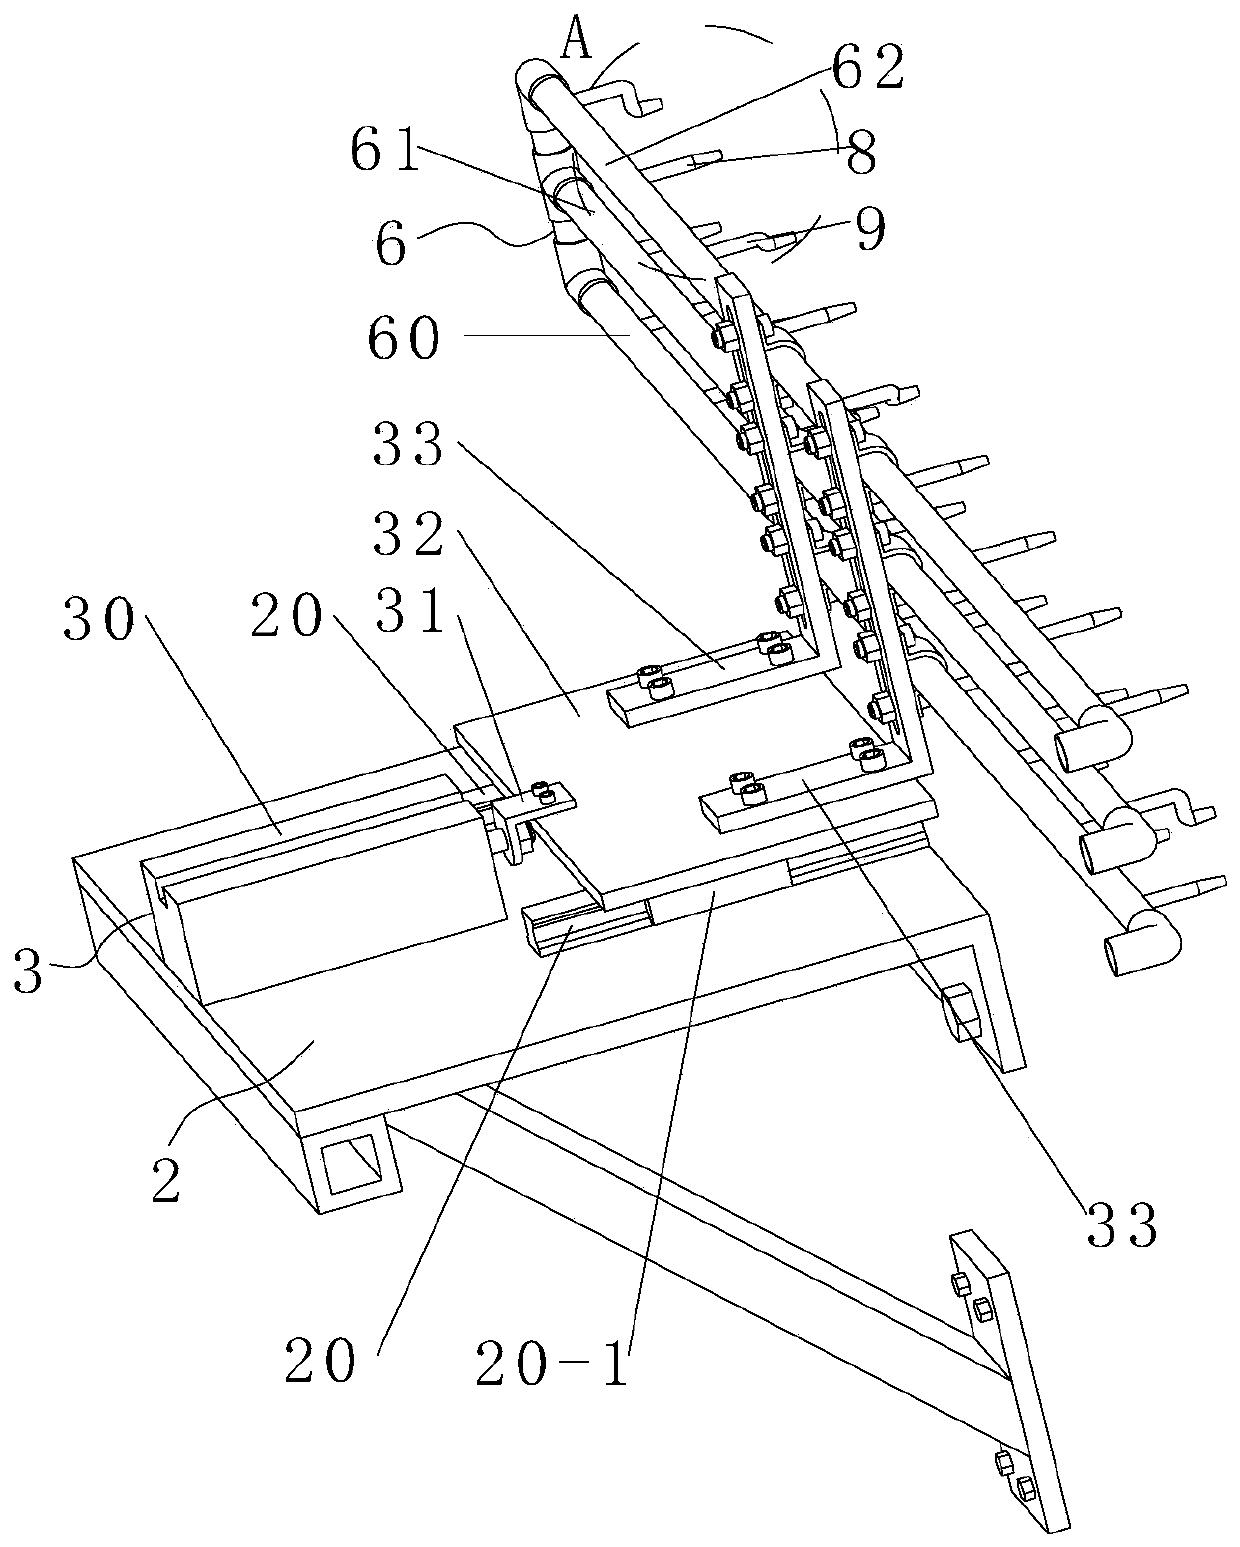 Device for purging tapping scrap iron on engine cylinder head production line